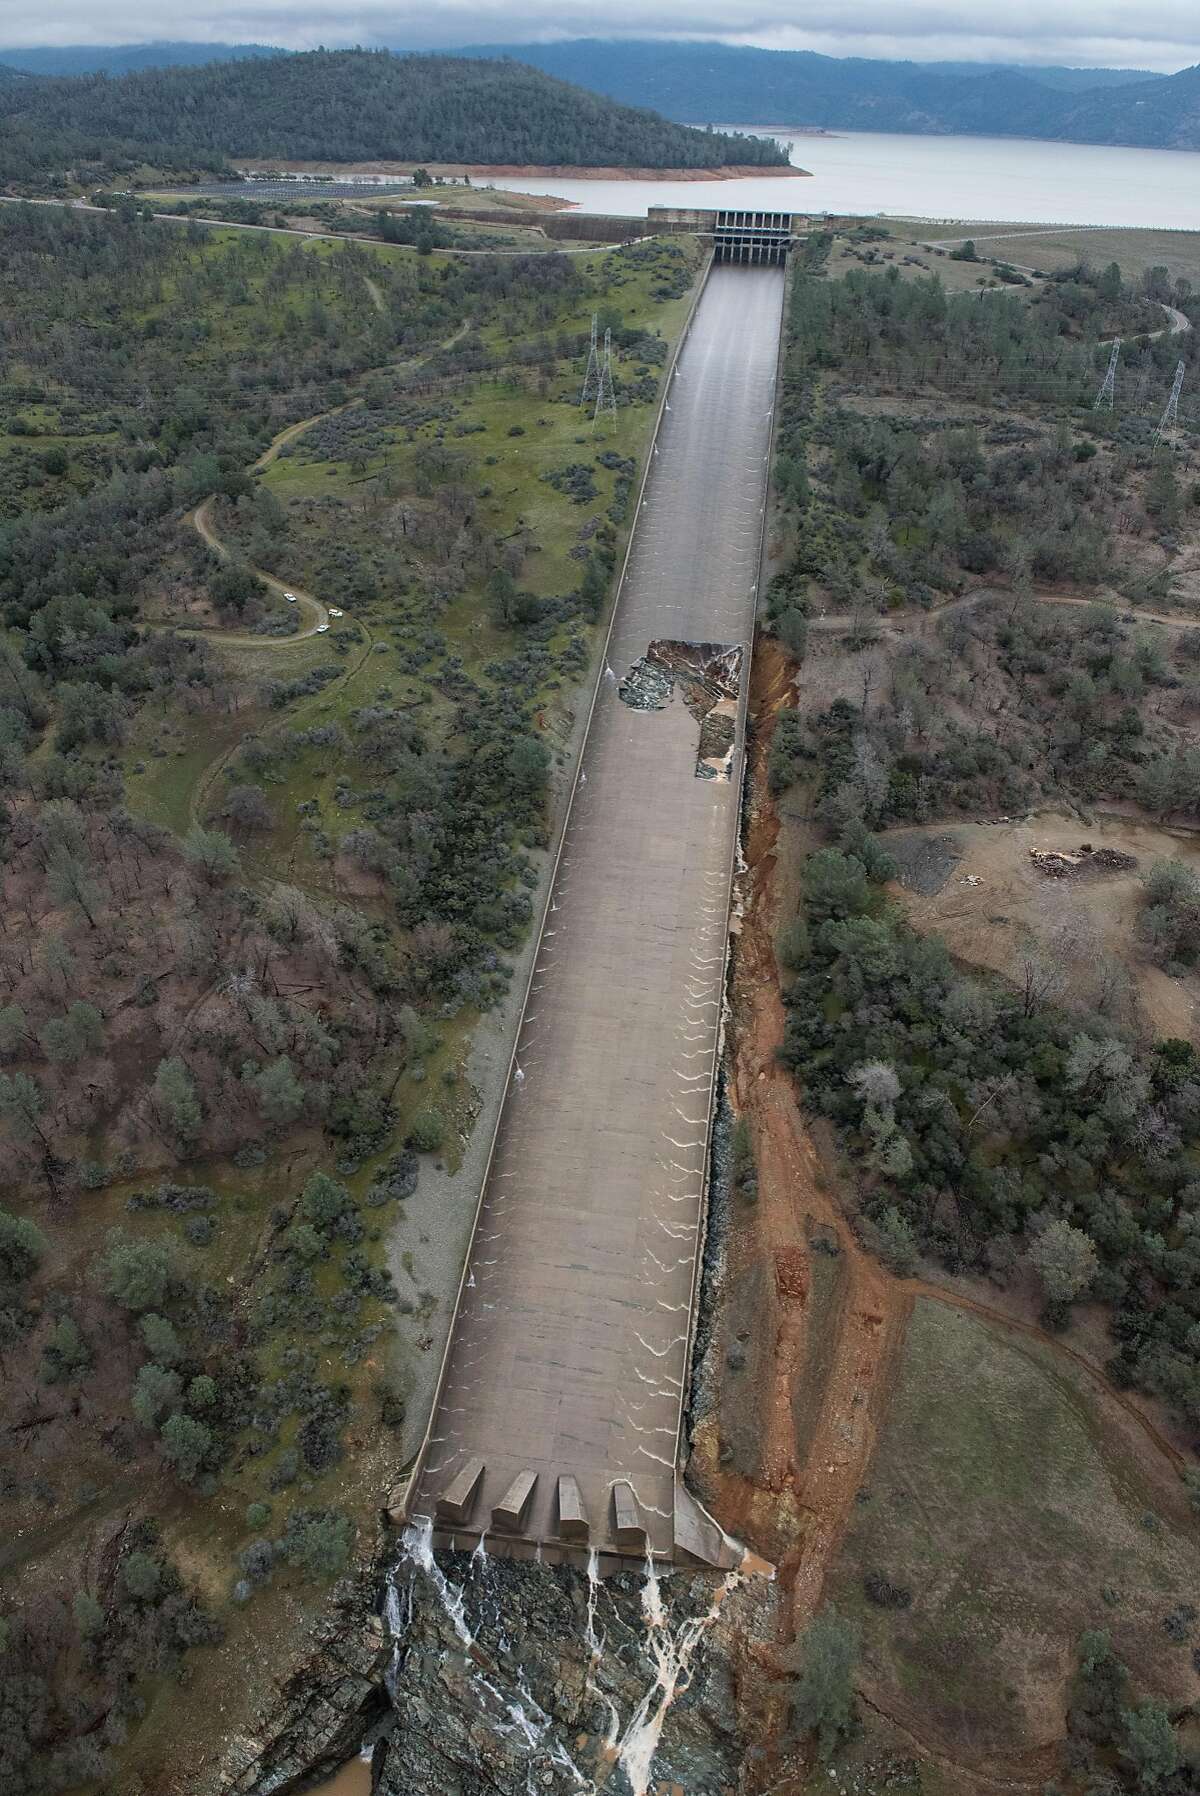 The California Department of Water Resources has suspended flows from the Oroville Dam spillway after a concrete section eroded on the middle section of the spillway. There is no anticipated threat to the dam or the public. DWR engineers are assessing the options to repair the spillway and control the reservoir water level. The Butte County facility is the tallest dam in the United States at 770 feet and is a key part of the State Water Project. Photo taken February 7, 2017. Kelly M. Grow/ California Department of Water Resources